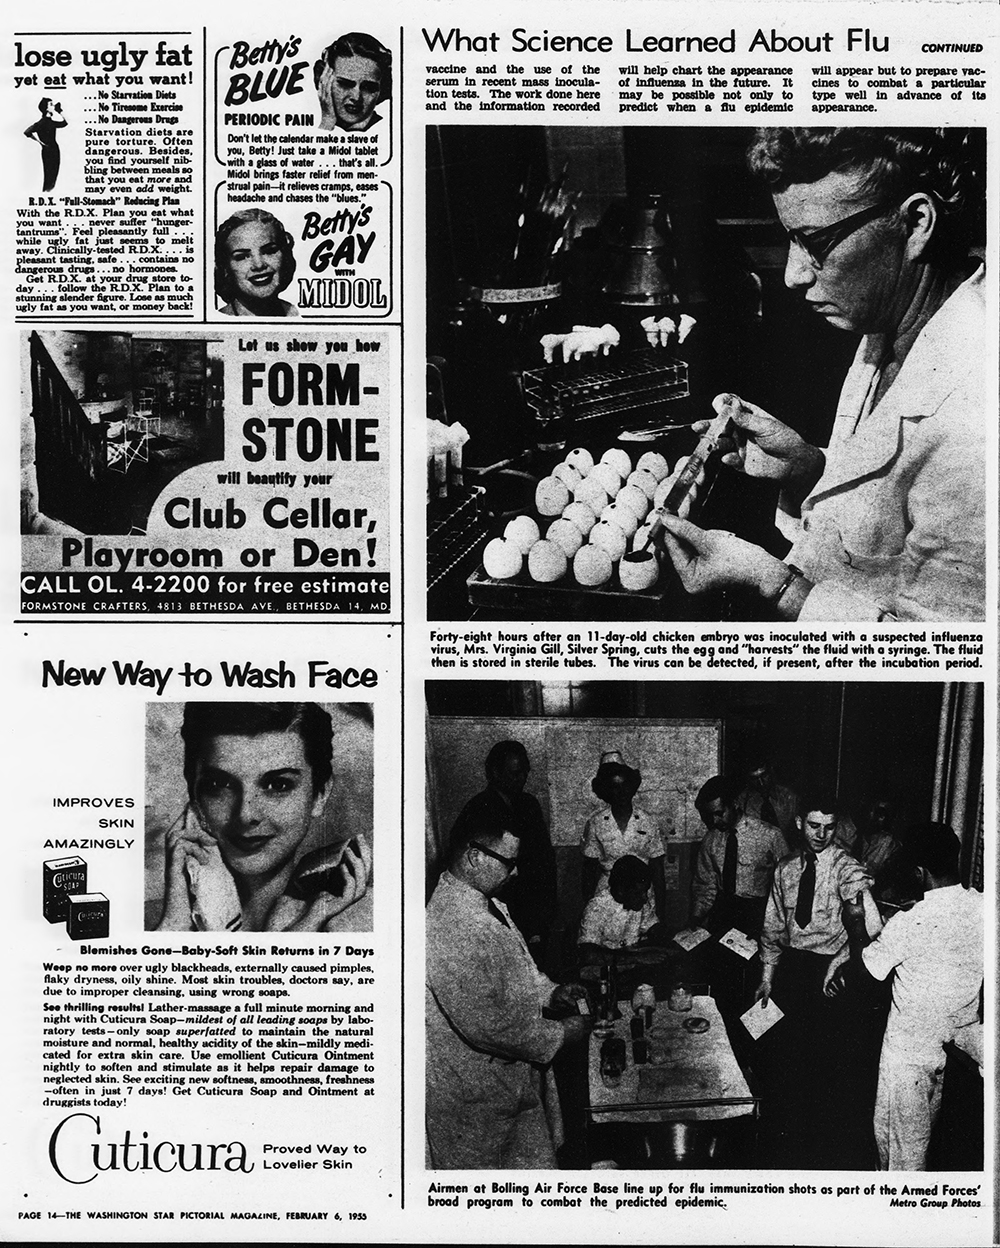 This article, “What Science Has Learned About Flu,” was published in 1955,